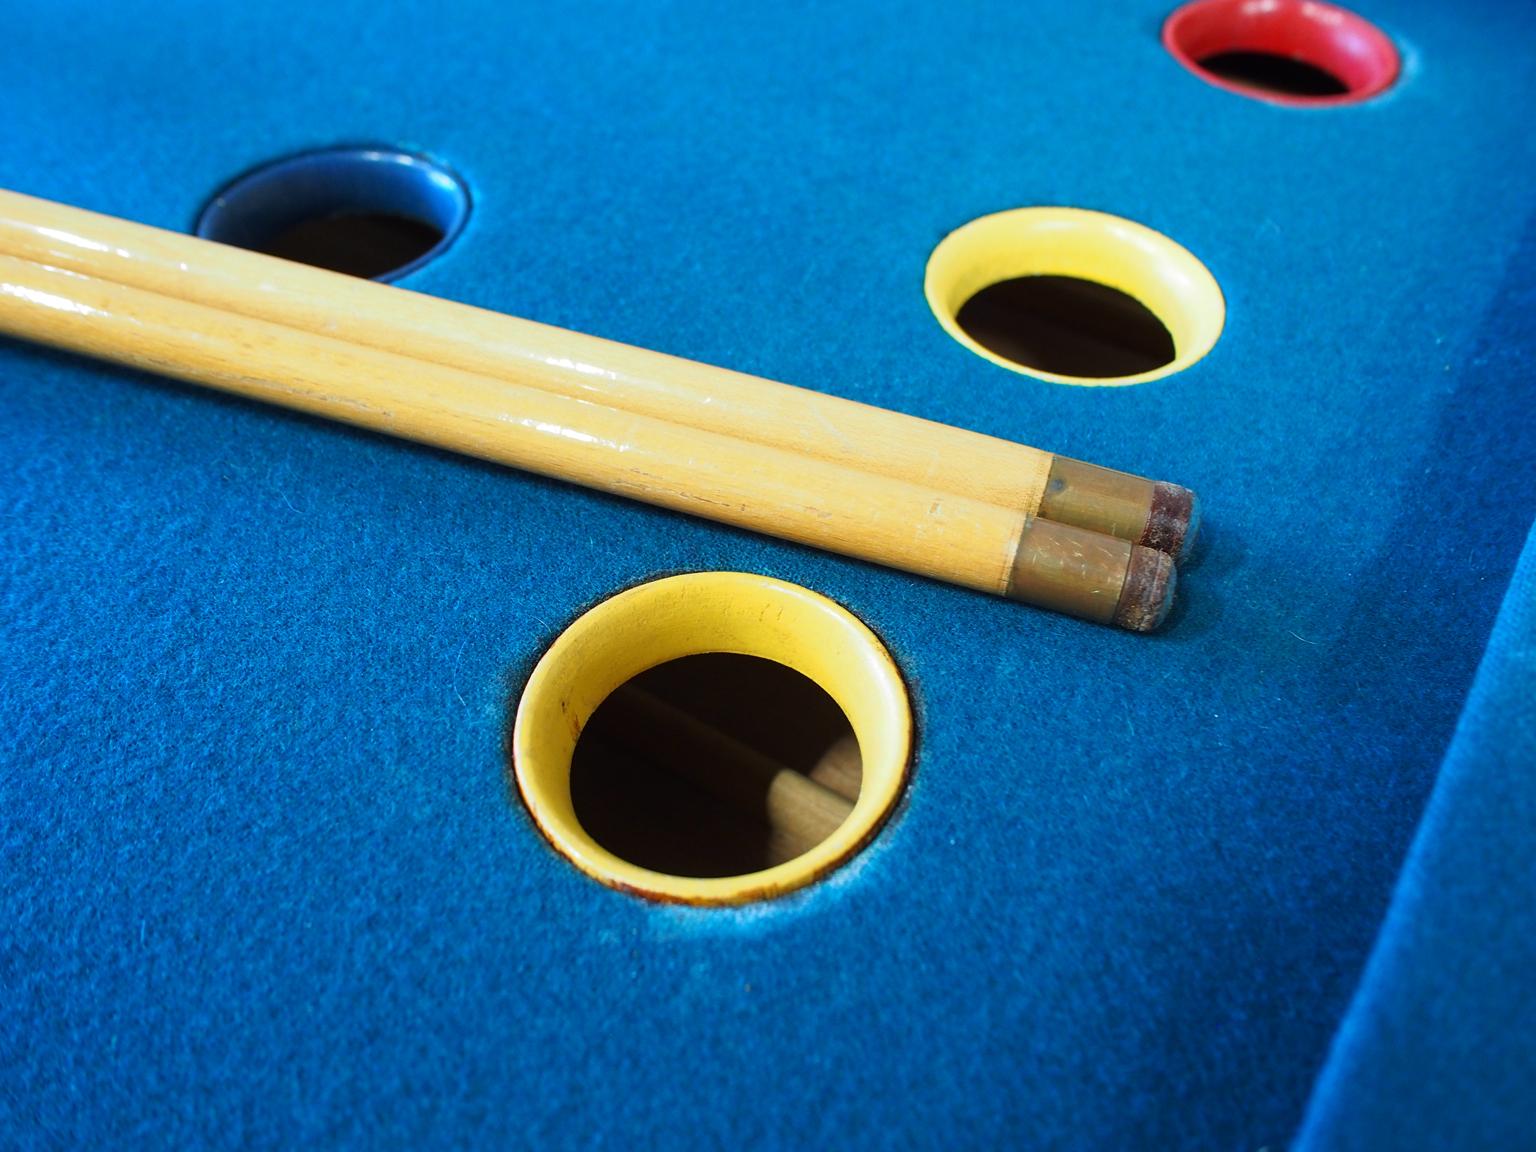 Mid-20th Century Small Table Poolgame with 2 Billiard Cues from the 1950s